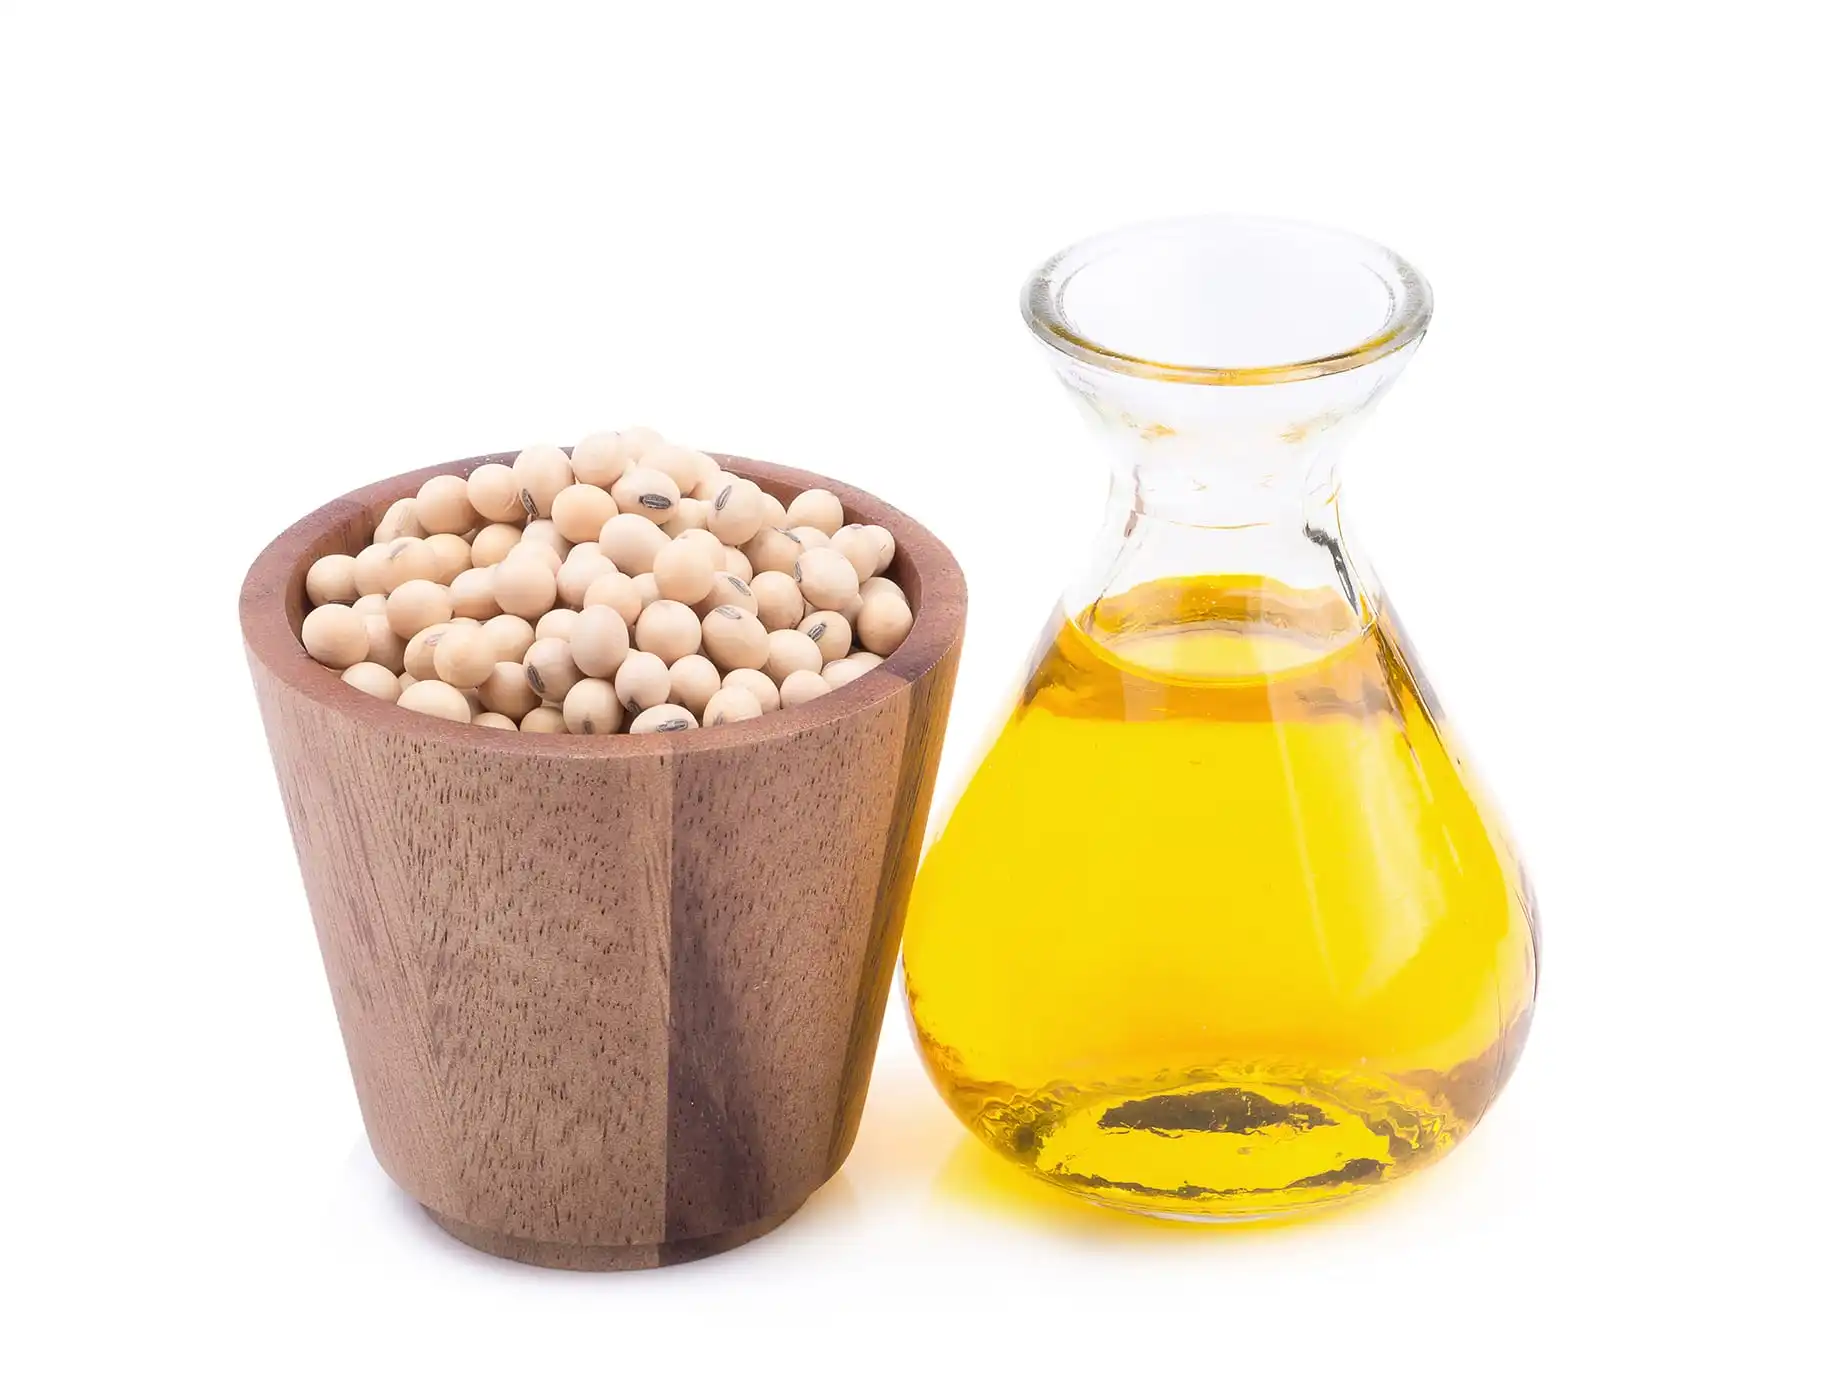 100% Pure Refined Non GMO Soybean Oil Best Selling Soy oil For Cooking